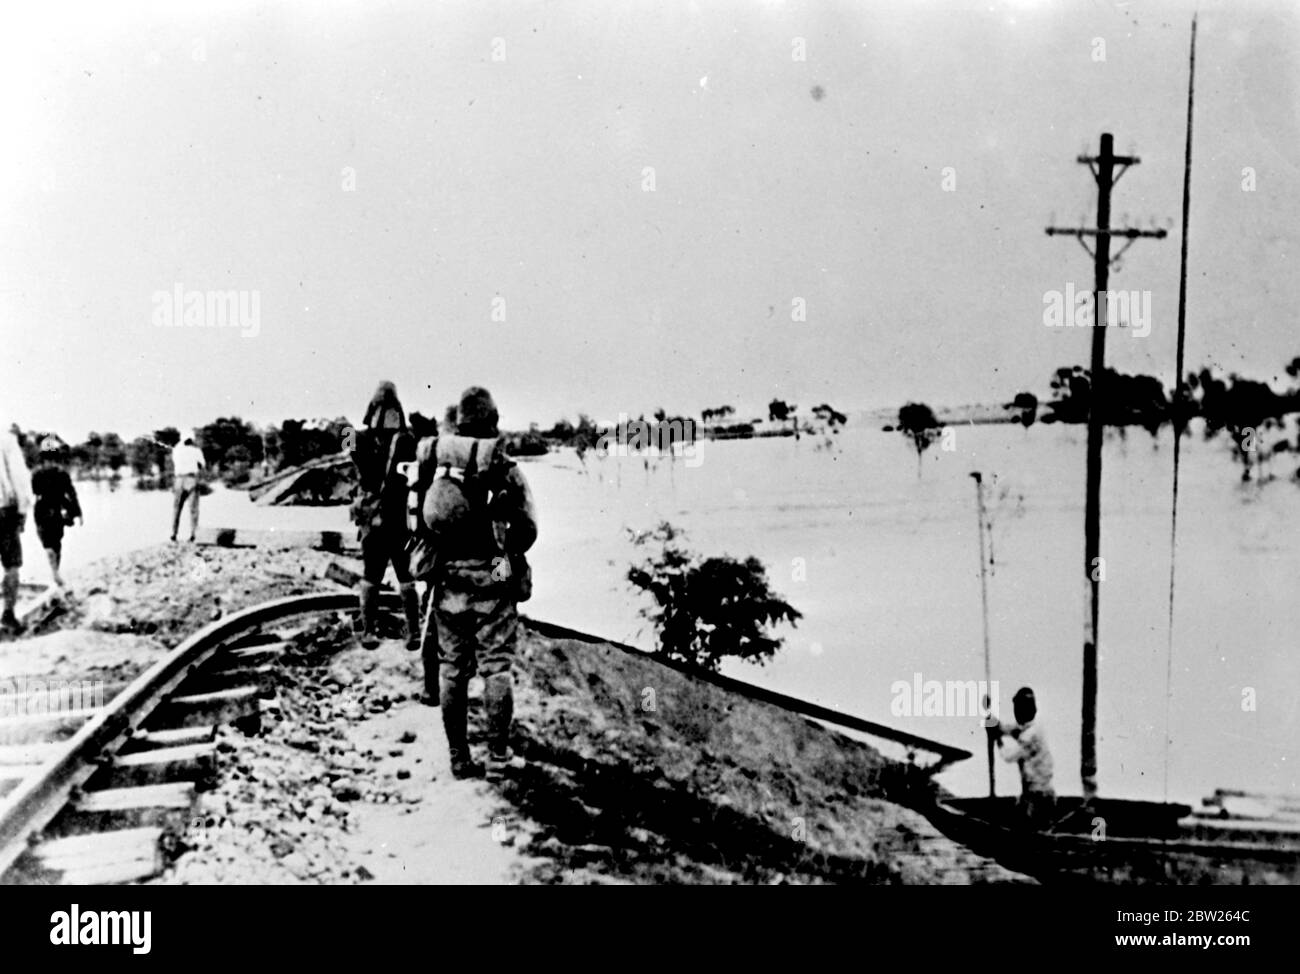 Yellow River floods damages Lunghai Railway. The Lunghai Railway, which has been the centre of fighting between Chinese and Japanese forces, was damaged by the Yellow River floods which inundated vast areas, bringing death and destruction to China is already suffering millions. Photo shows, soldiers viewing damage caused by the Yellow River floods to the Lunghai Railway near Kaifeng. 13 July 1938 Stock Photo